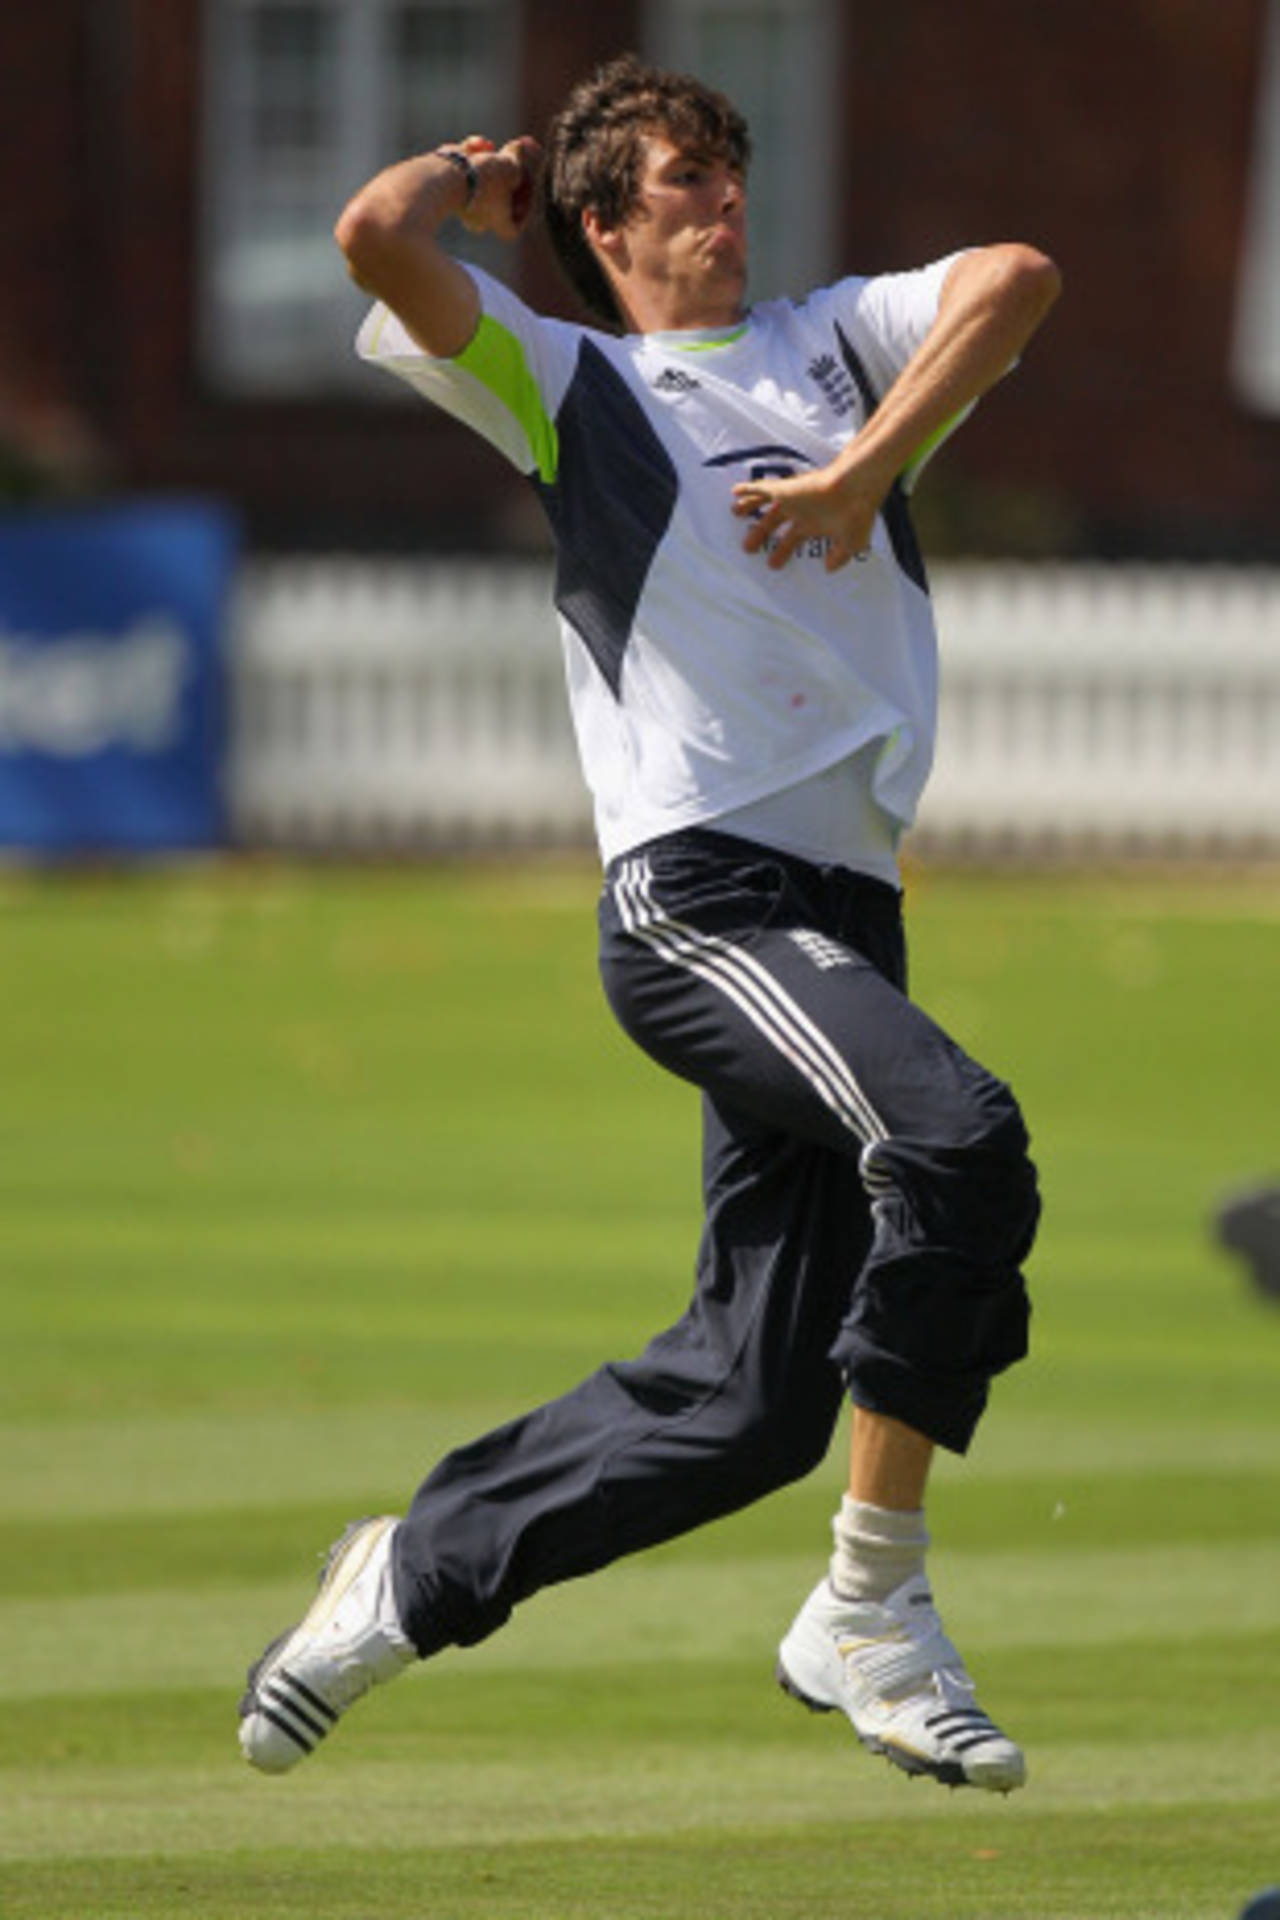 Steven Finn has experienced his first loss as an England cricketer, but is ready to bounce back at Lord's&nbsp;&nbsp;&bull;&nbsp;&nbsp;Getty Images